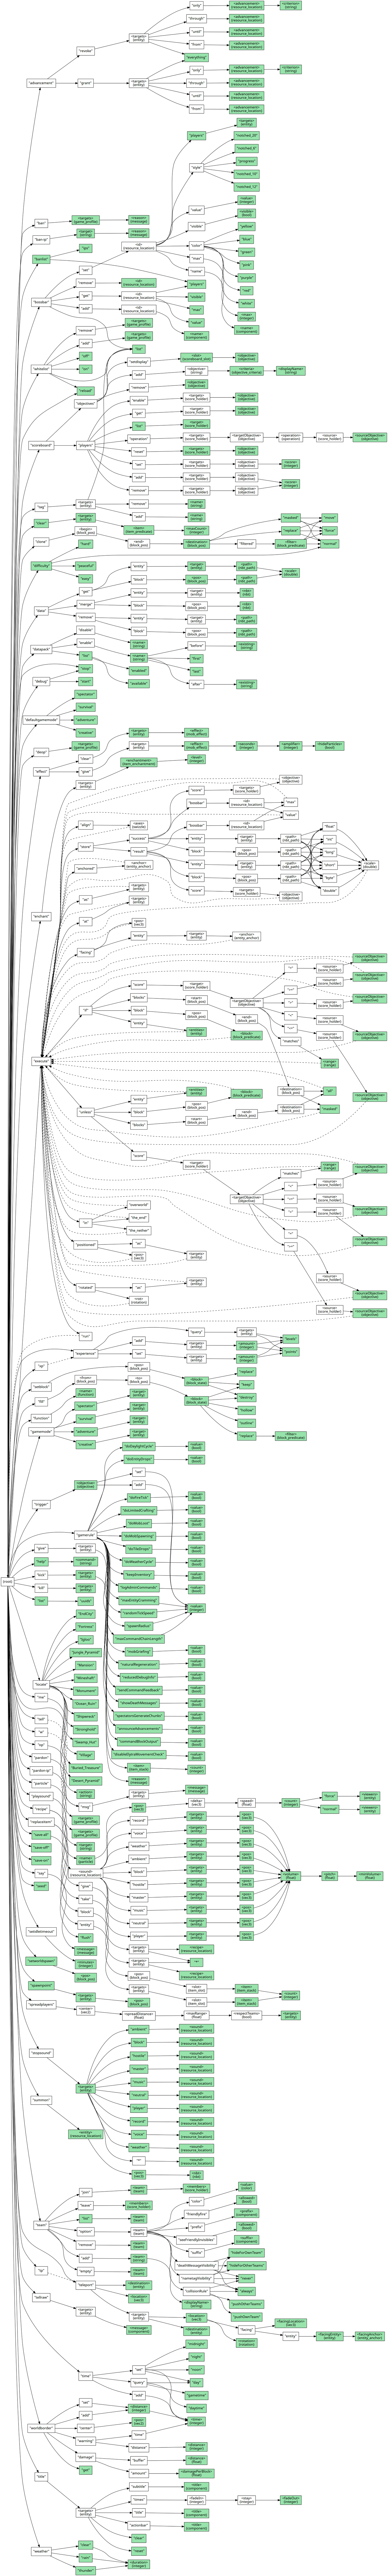 Command graph 18w22c.png